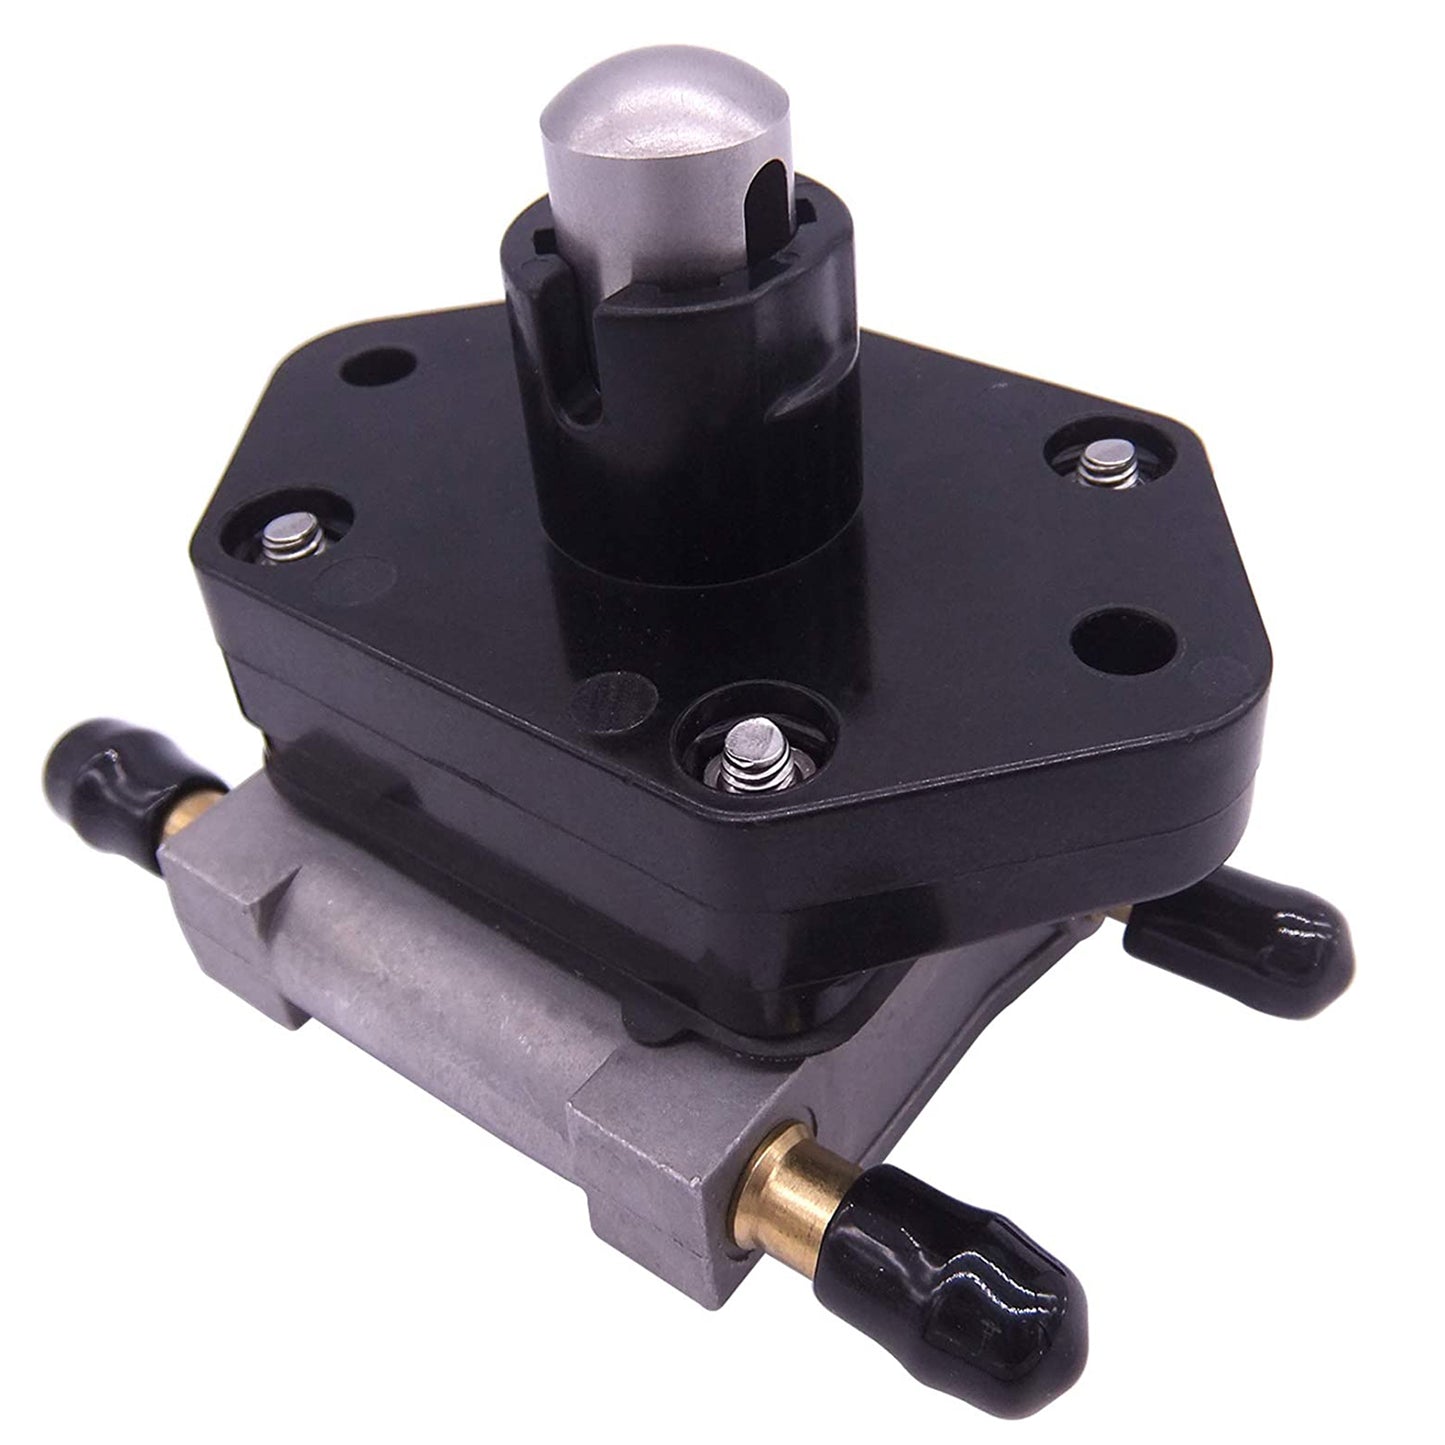 8M0118177 Fuel Pump Compatible with Mercury 30, 40, 50, 60 HP 4 Stroke Outboard Engine